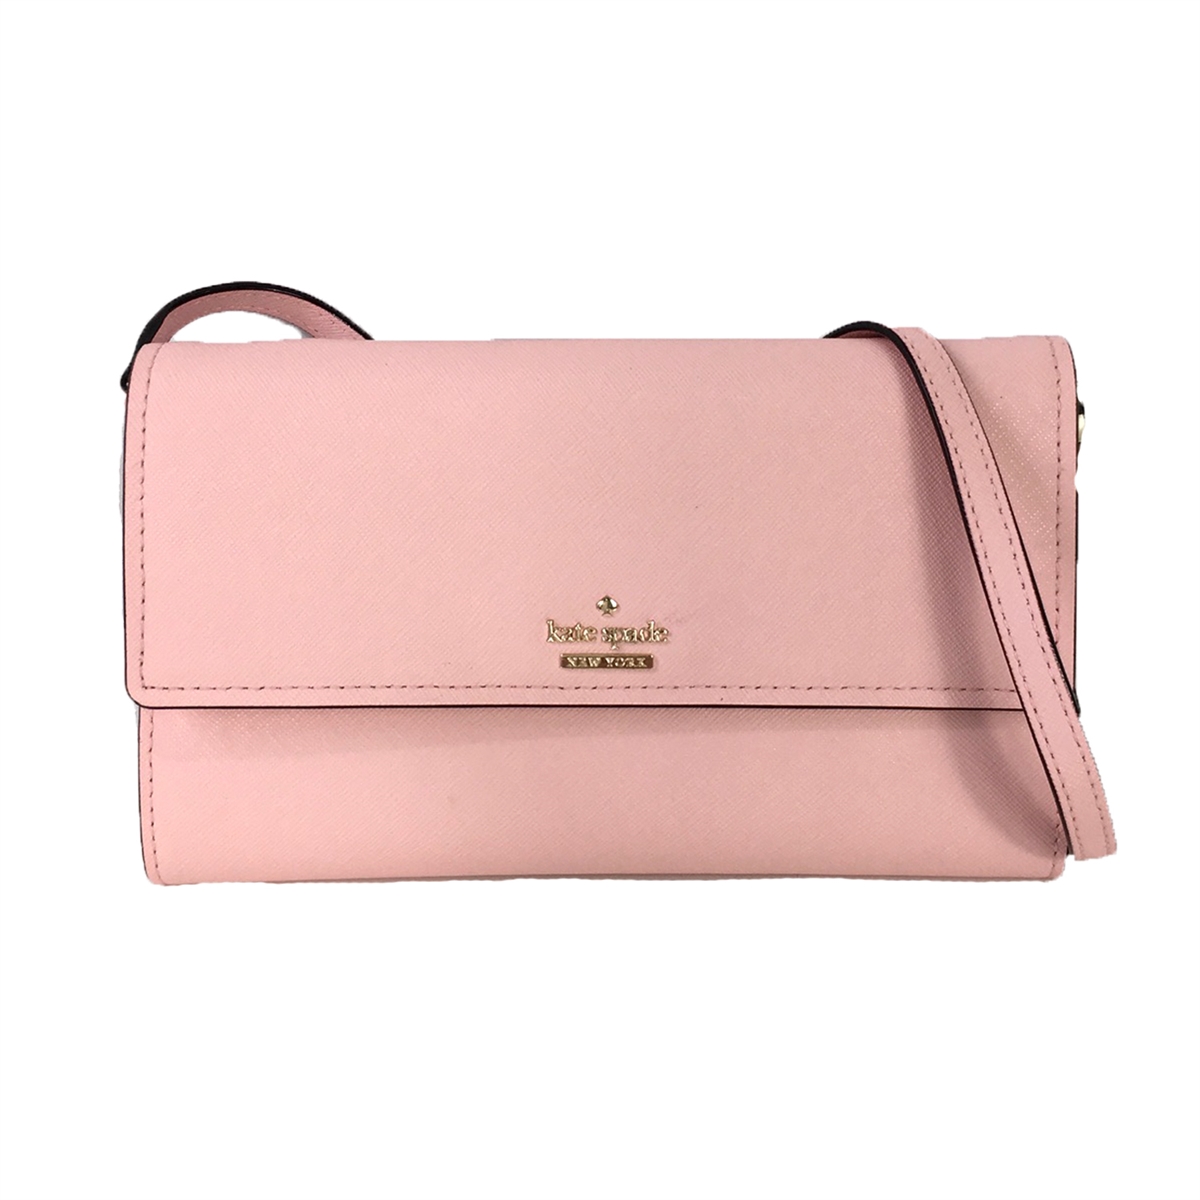 Kate Spade Crossbody Wallets India Cash On Delivery - Womens Morgan Patent  Leather Double Up Pink